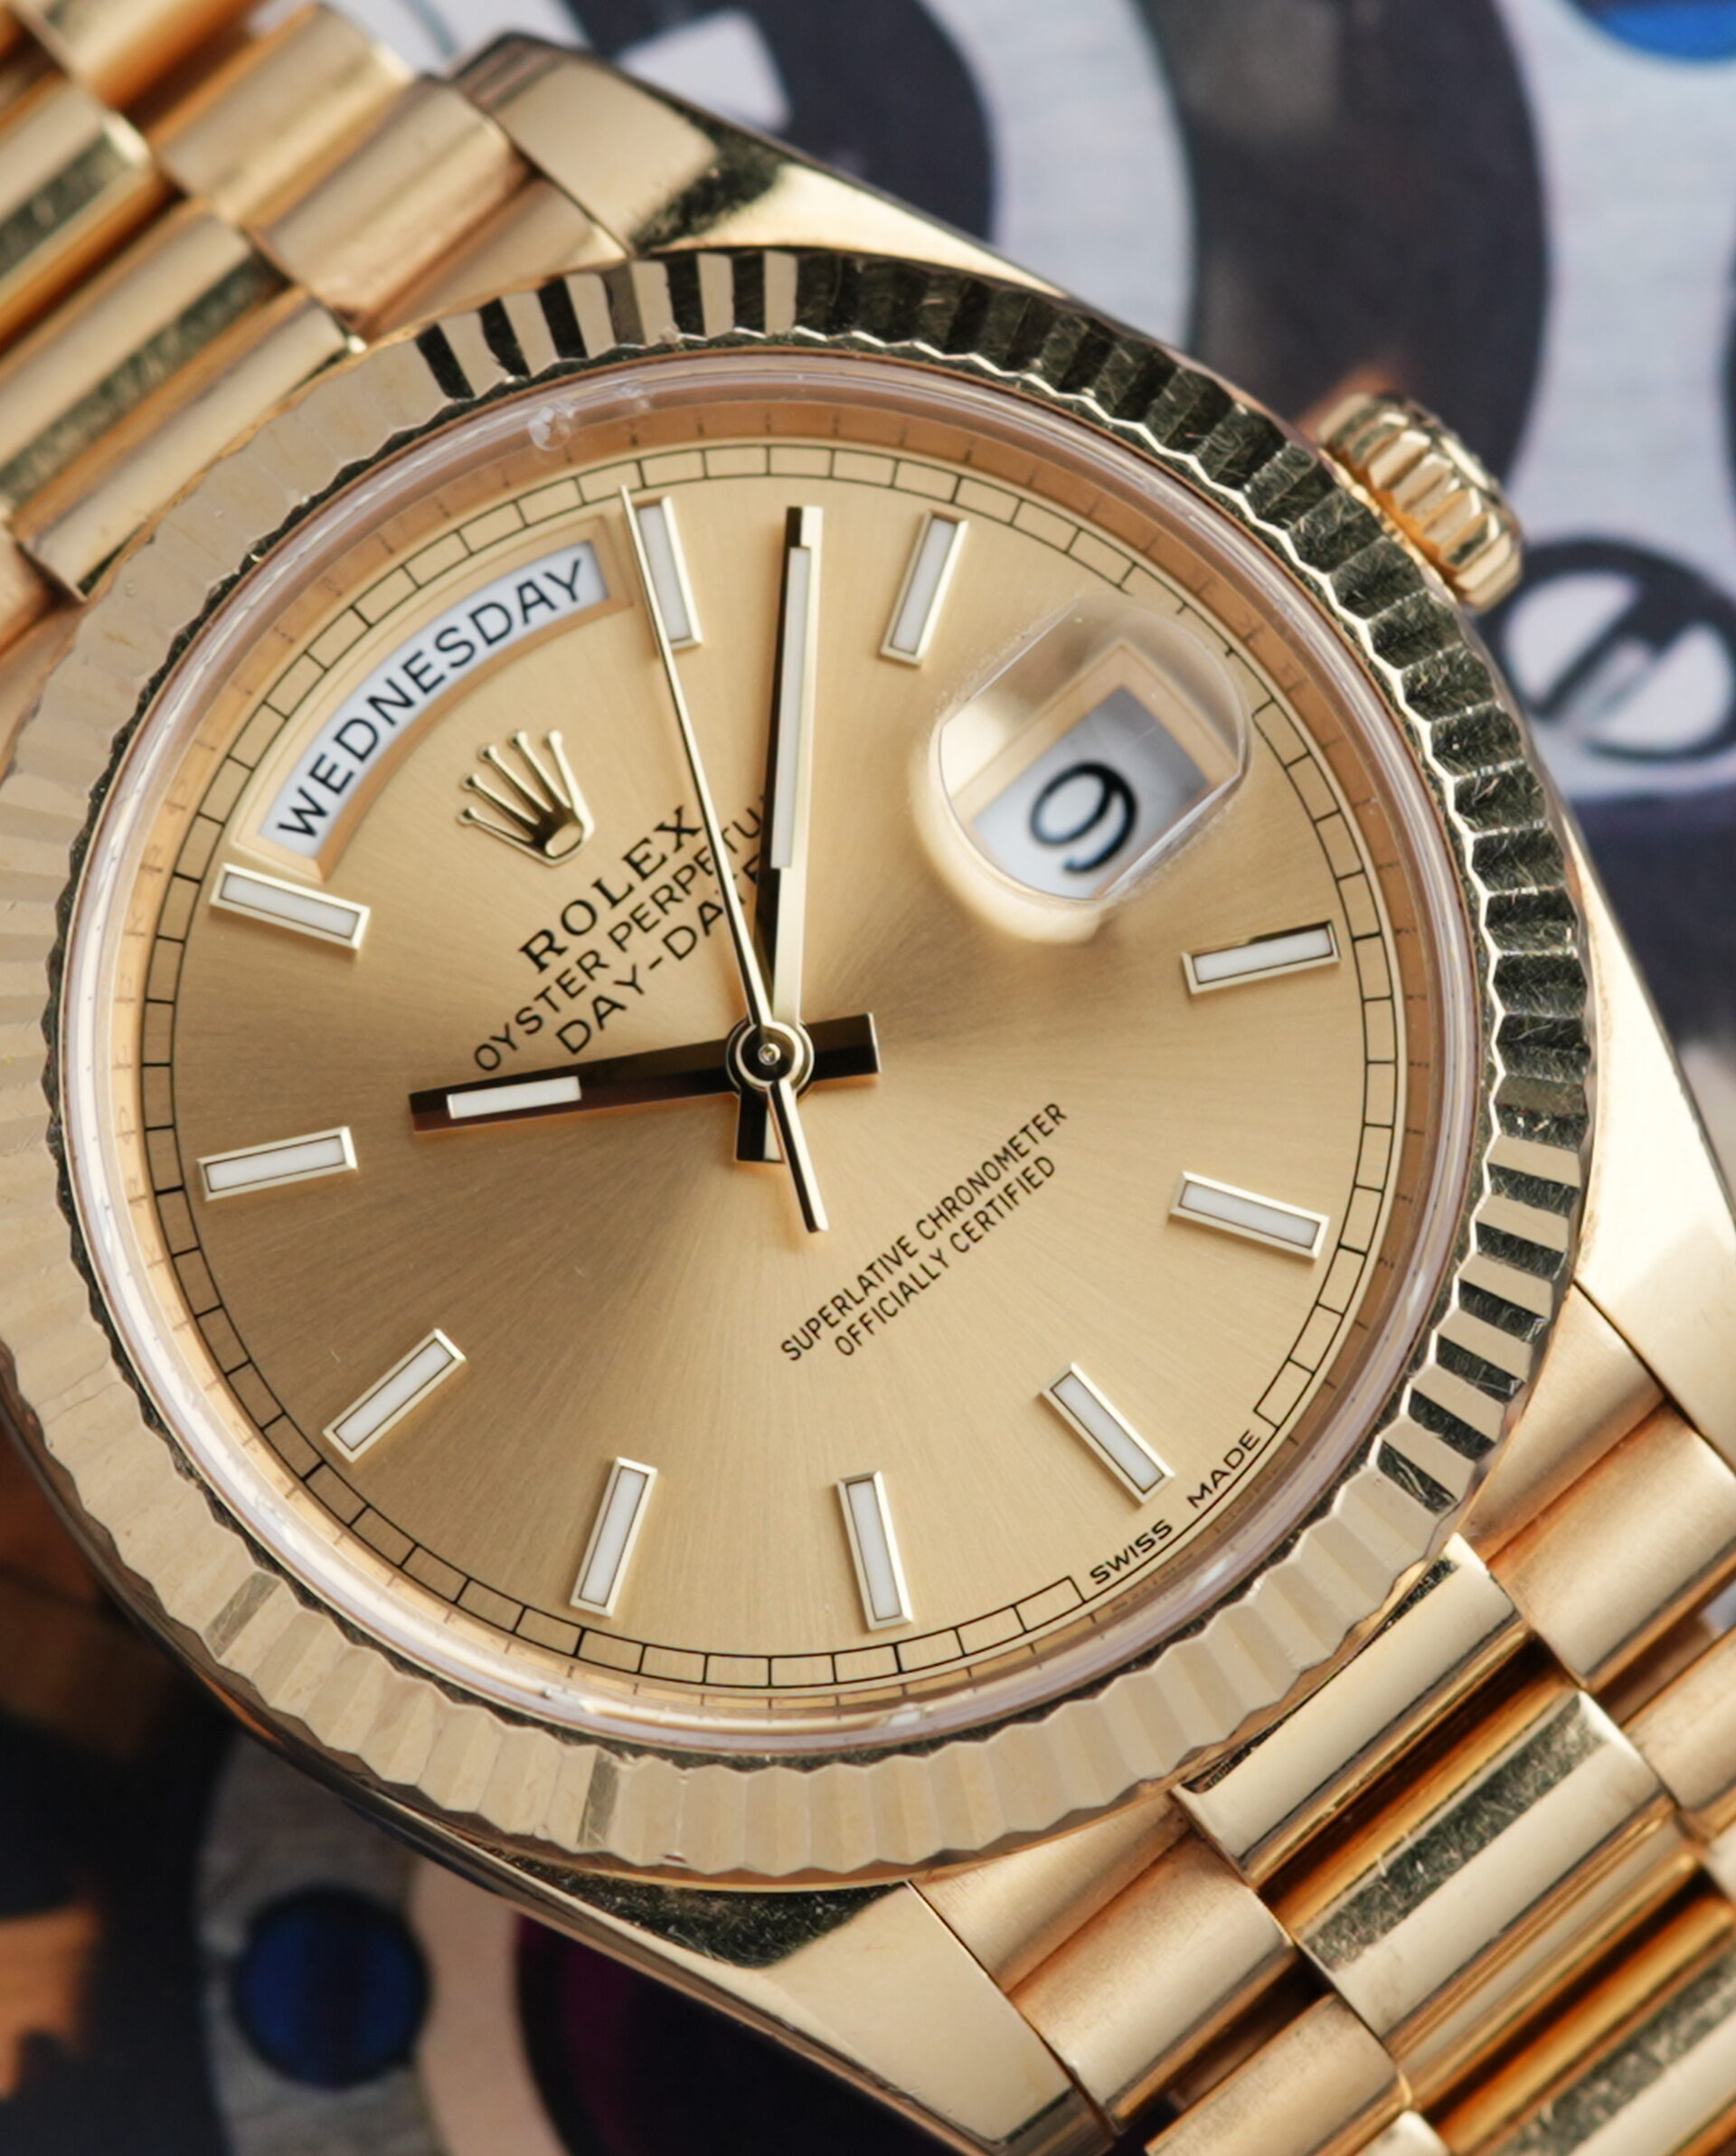 Rolex Day-Date 40 President Yellow Gold - The GodFather - 228238 ...